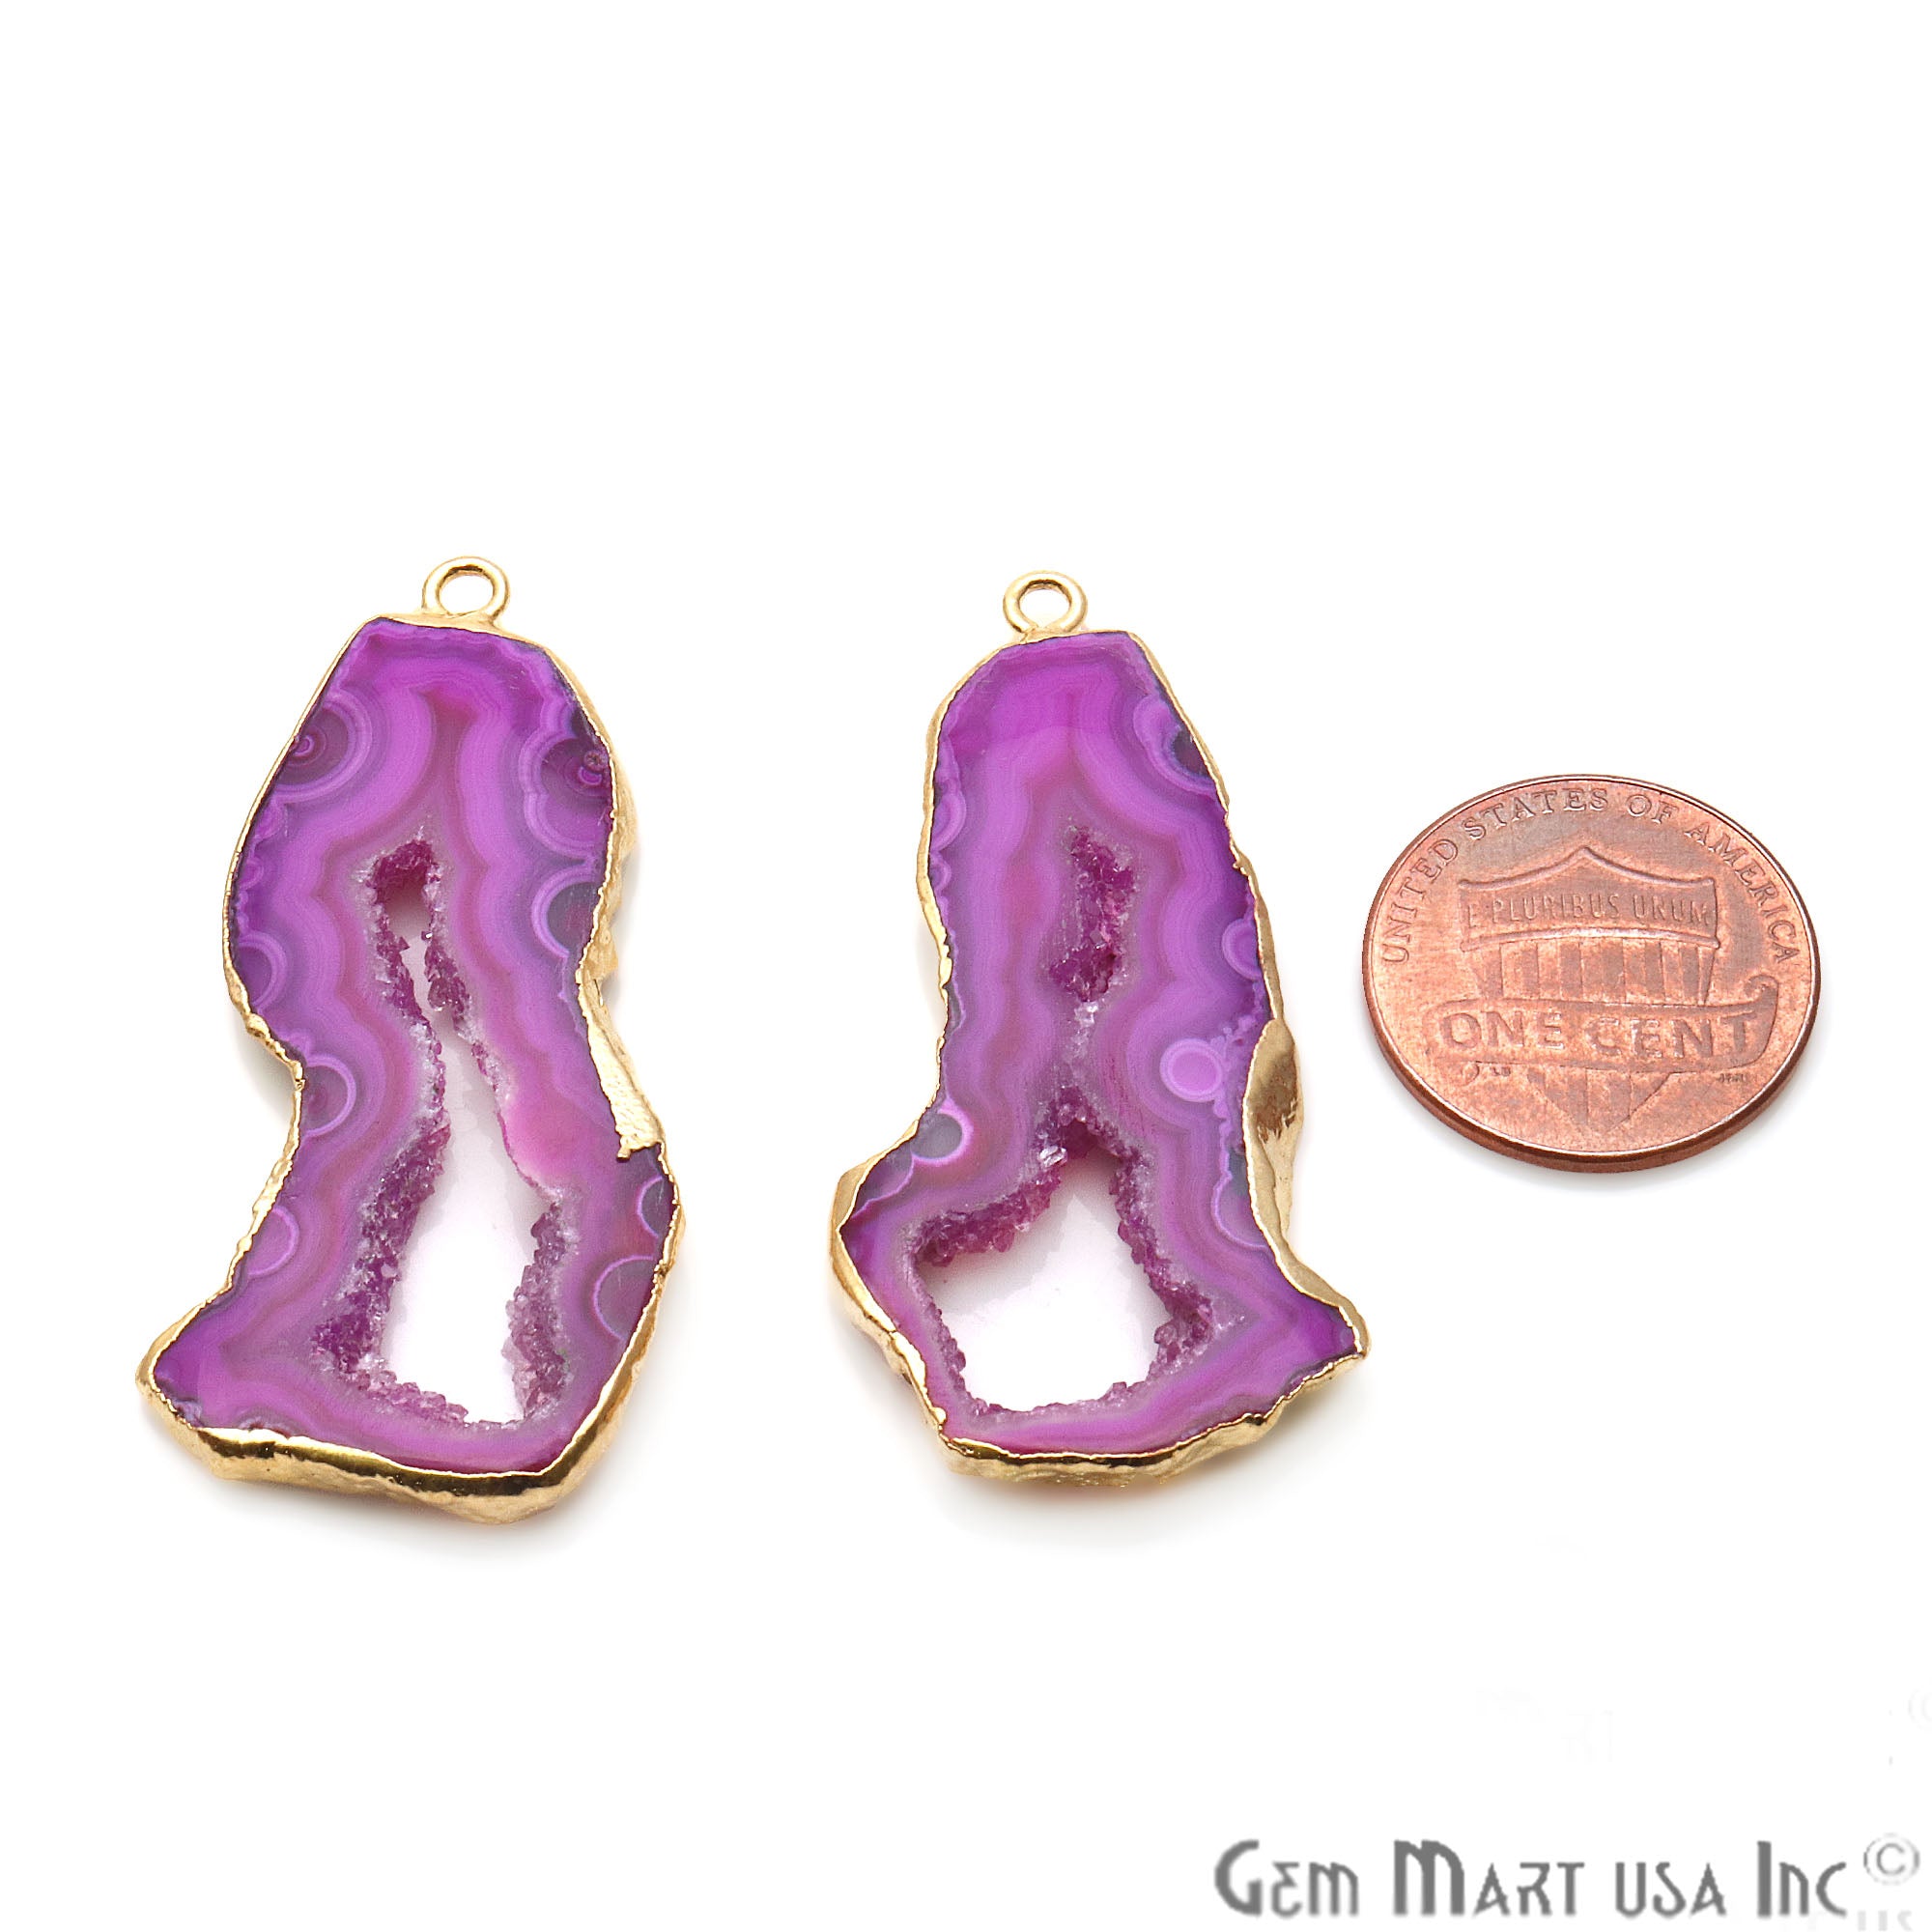 Agate Slice 22x46mm Organic Gold Electroplated Gemstone Earring Connector 1 Pair - GemMartUSA